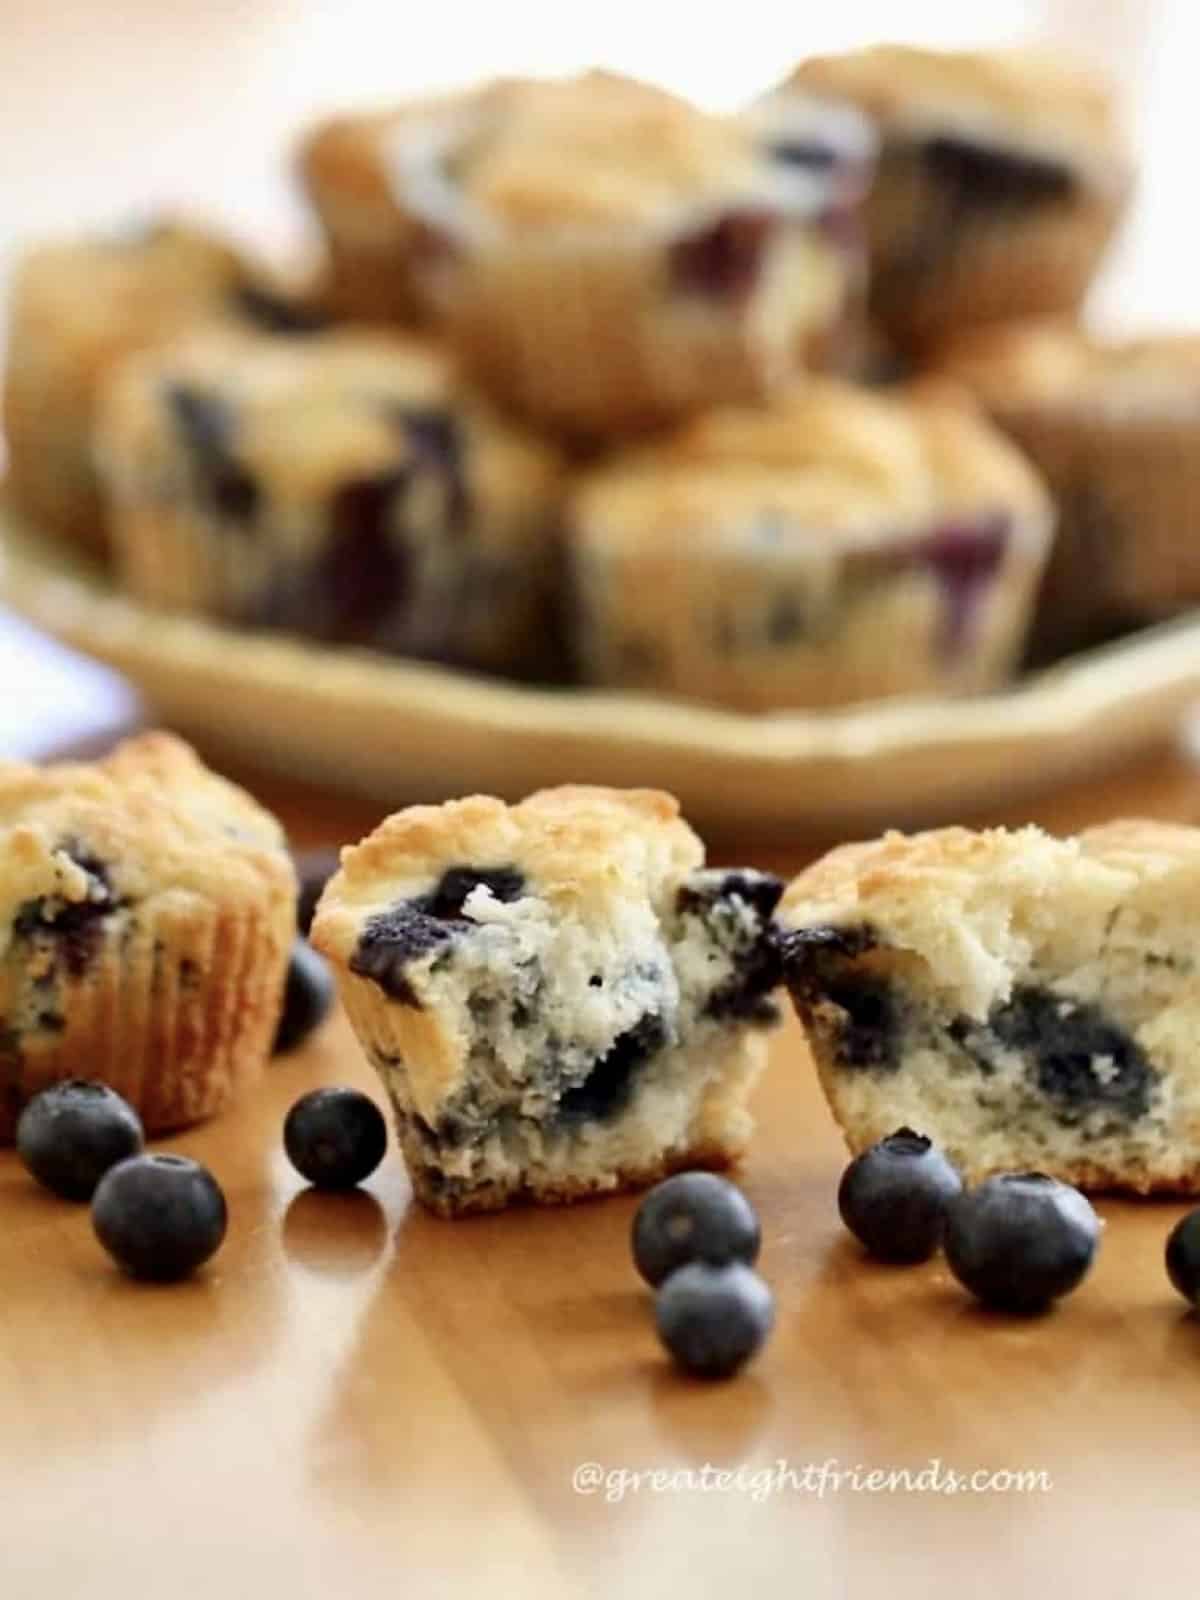 Blueberry muffins on the table in front of a stack of muffins on a plate with a few fresh blueberries on the table.